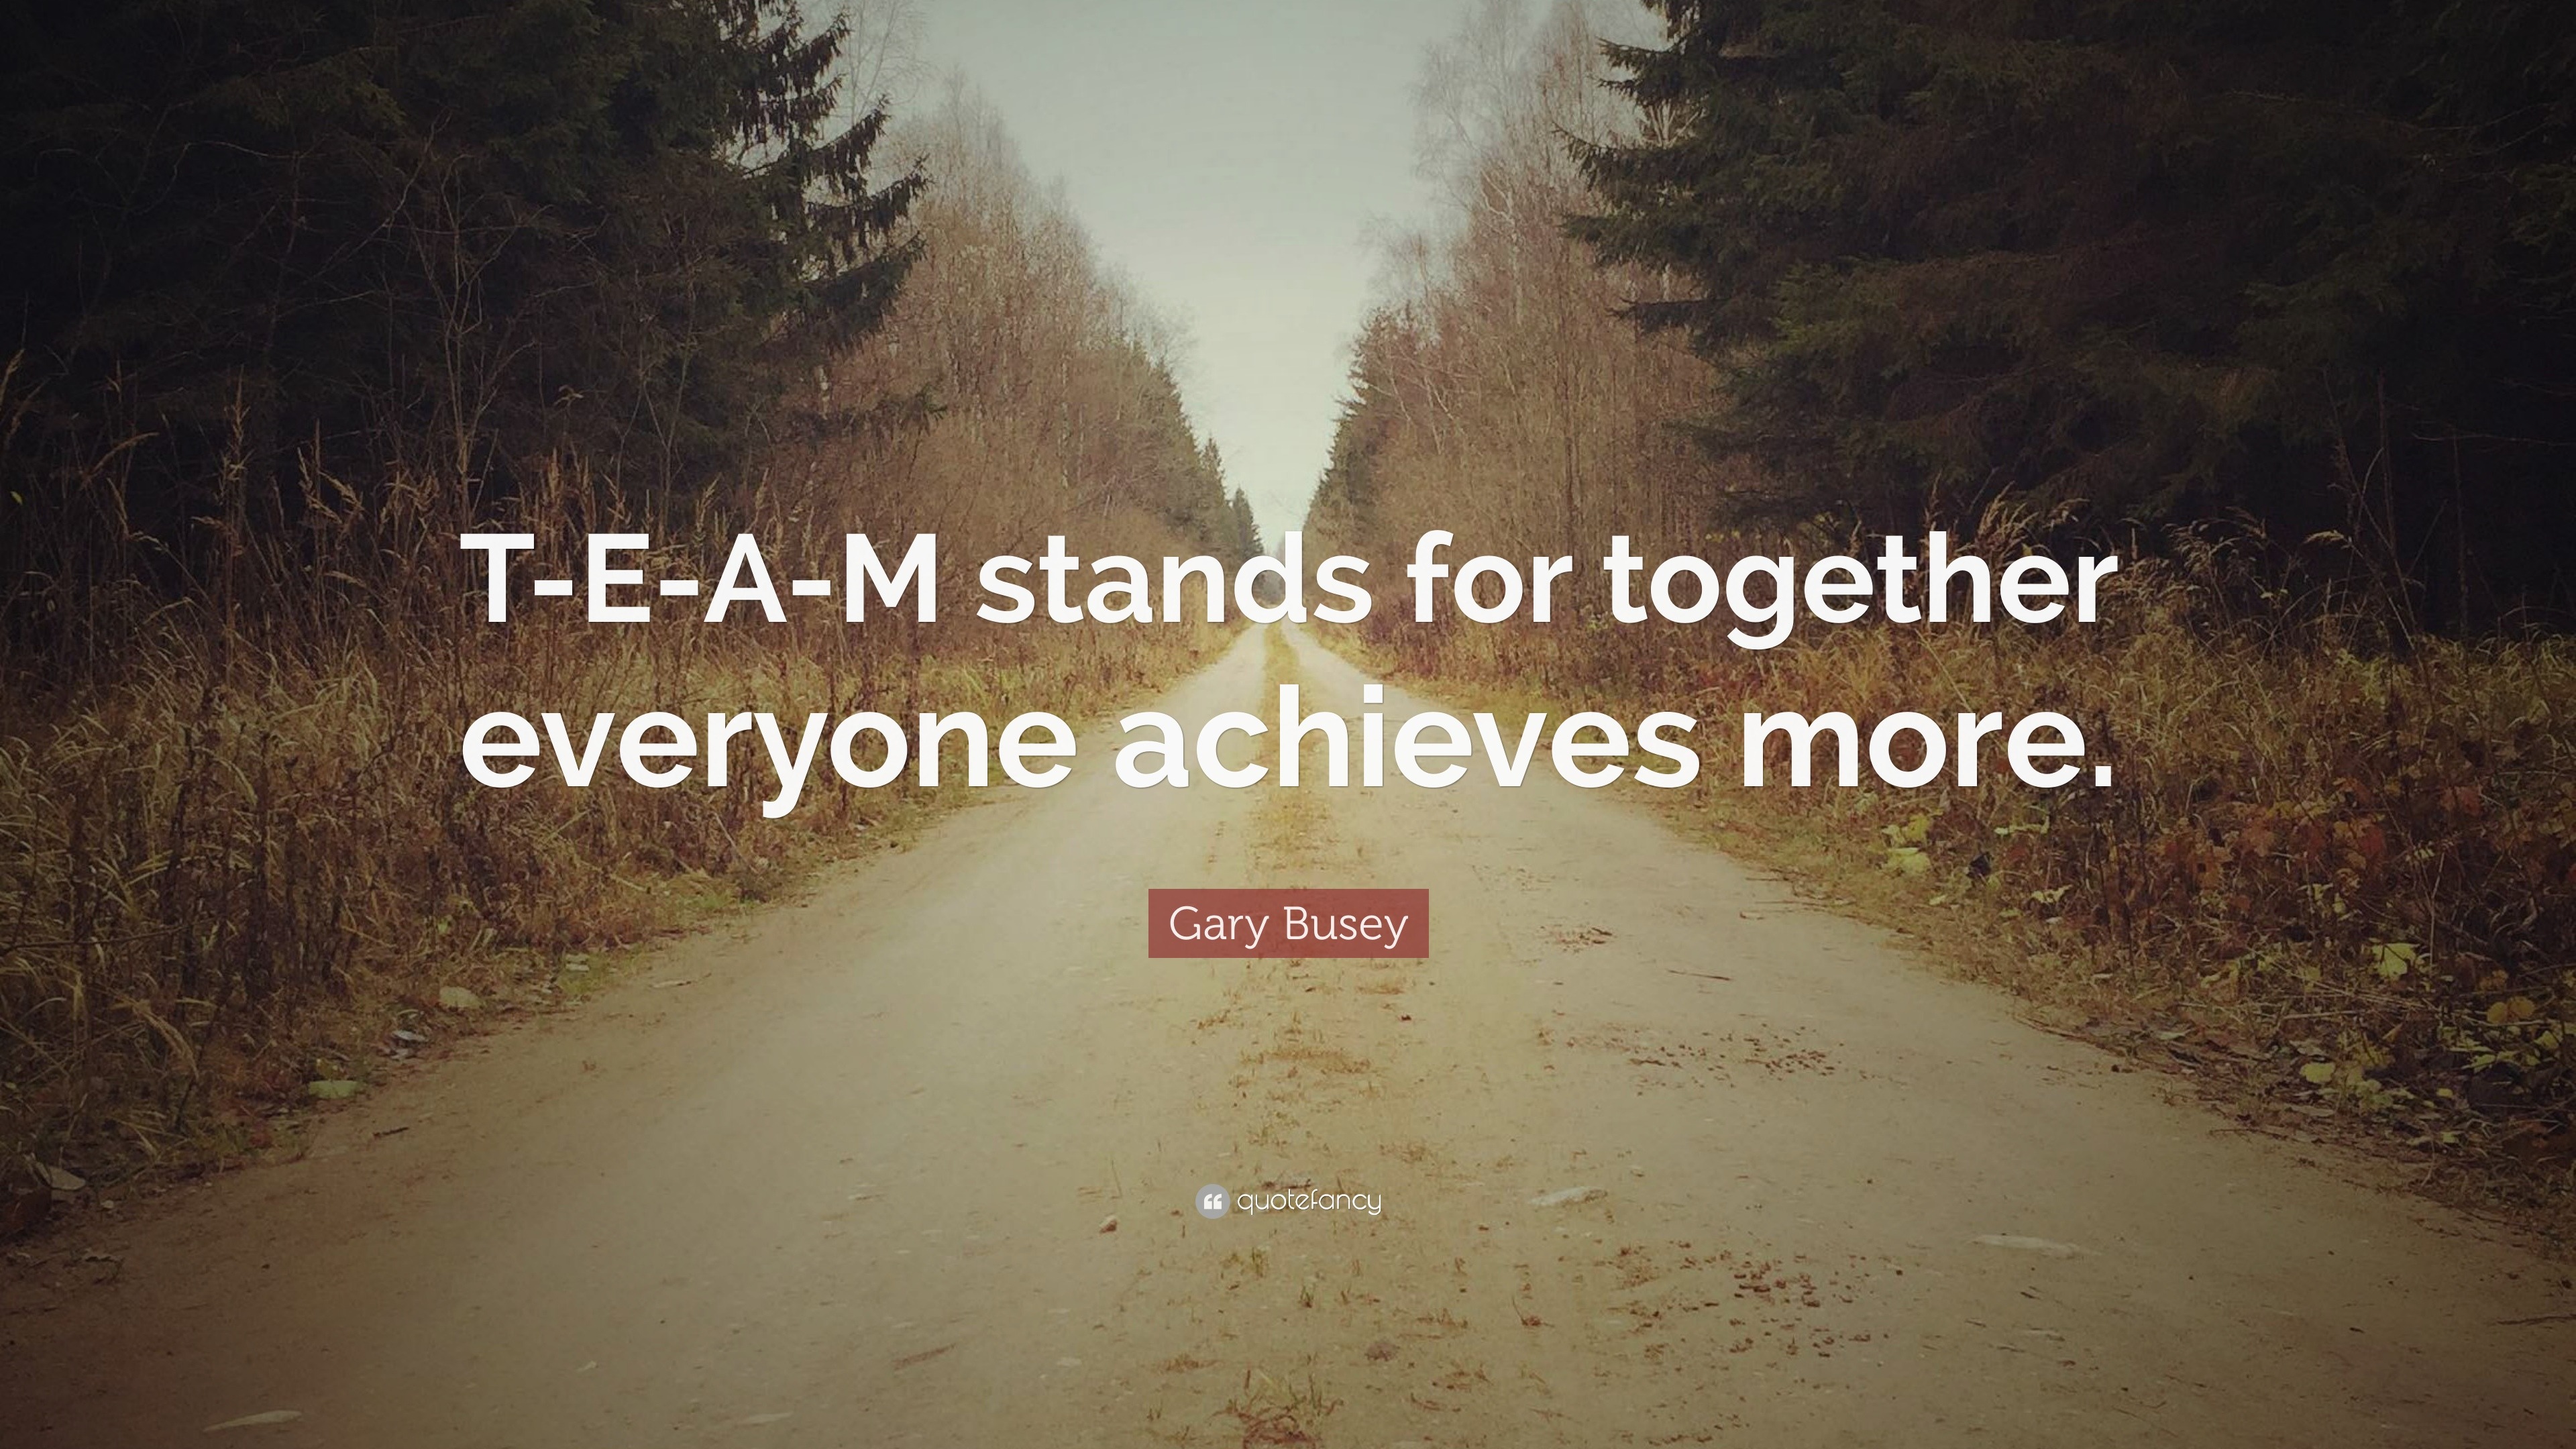 Gary Busey Quote: “T-E-A-M stands for together everyone achieves more.”